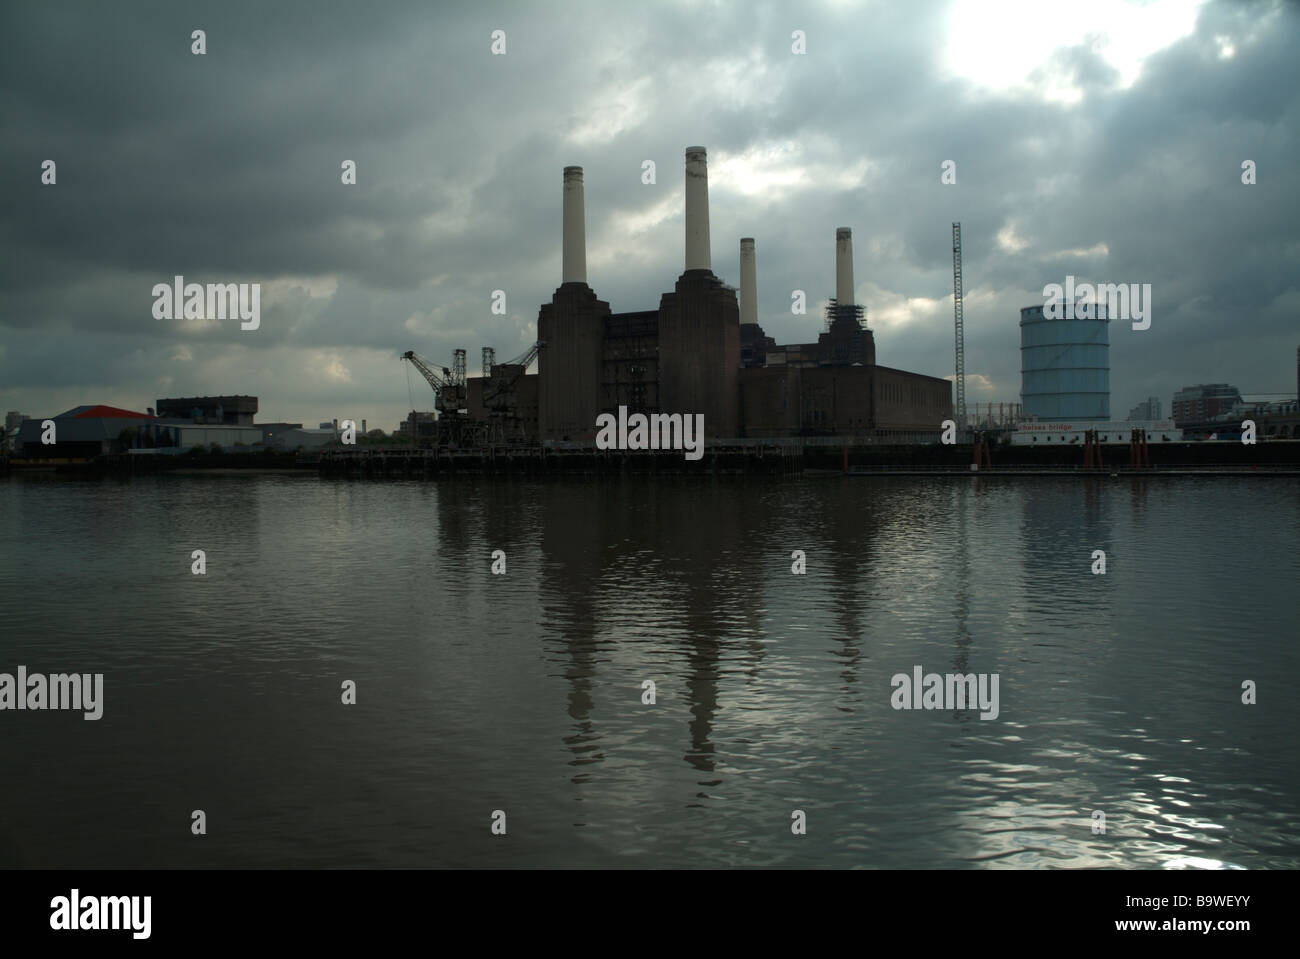 The former Battersea Power Station from Grosvenor Road, London, England, UK. Stock Photo